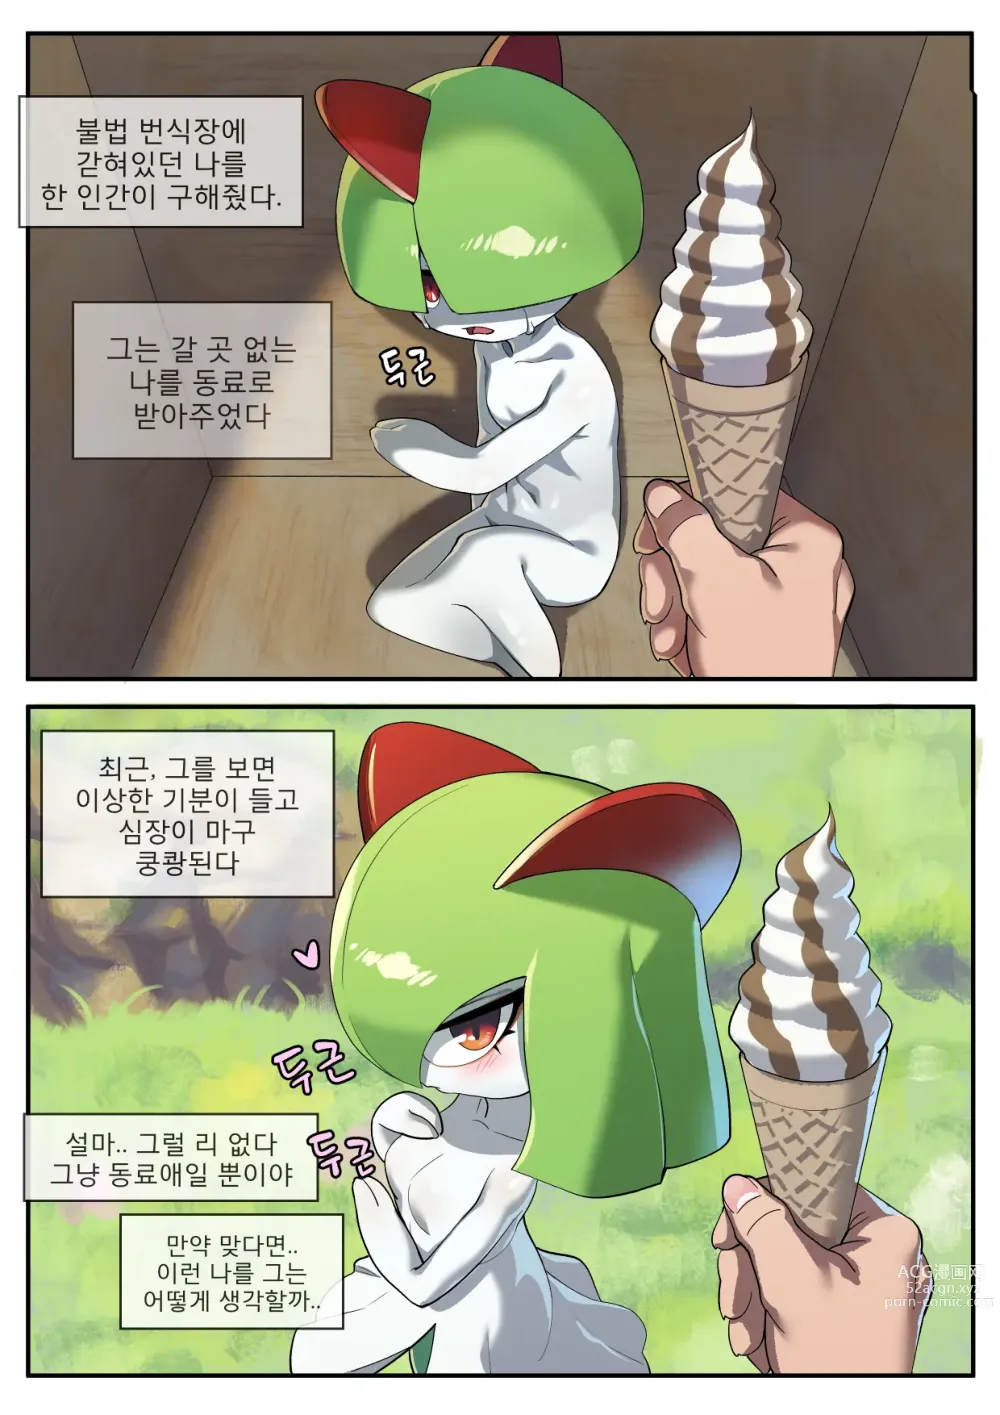 Page 9 of imageset Pixiv